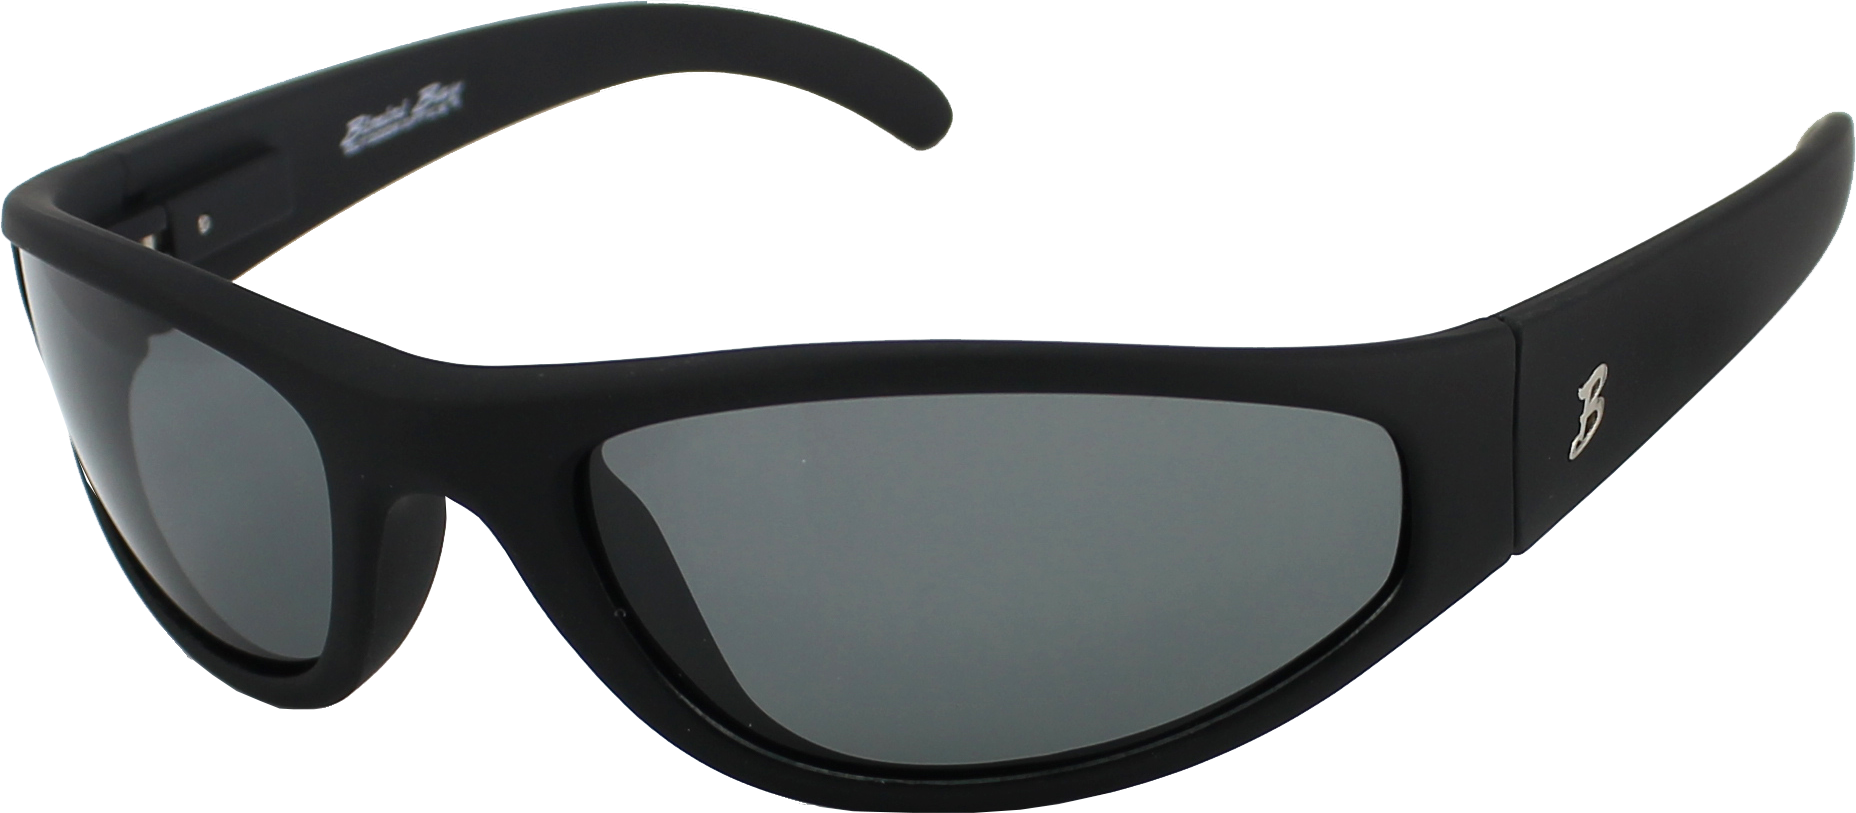 Bimini Bay Outfitters Sunglass Rubber Black Frame RB-4381-S